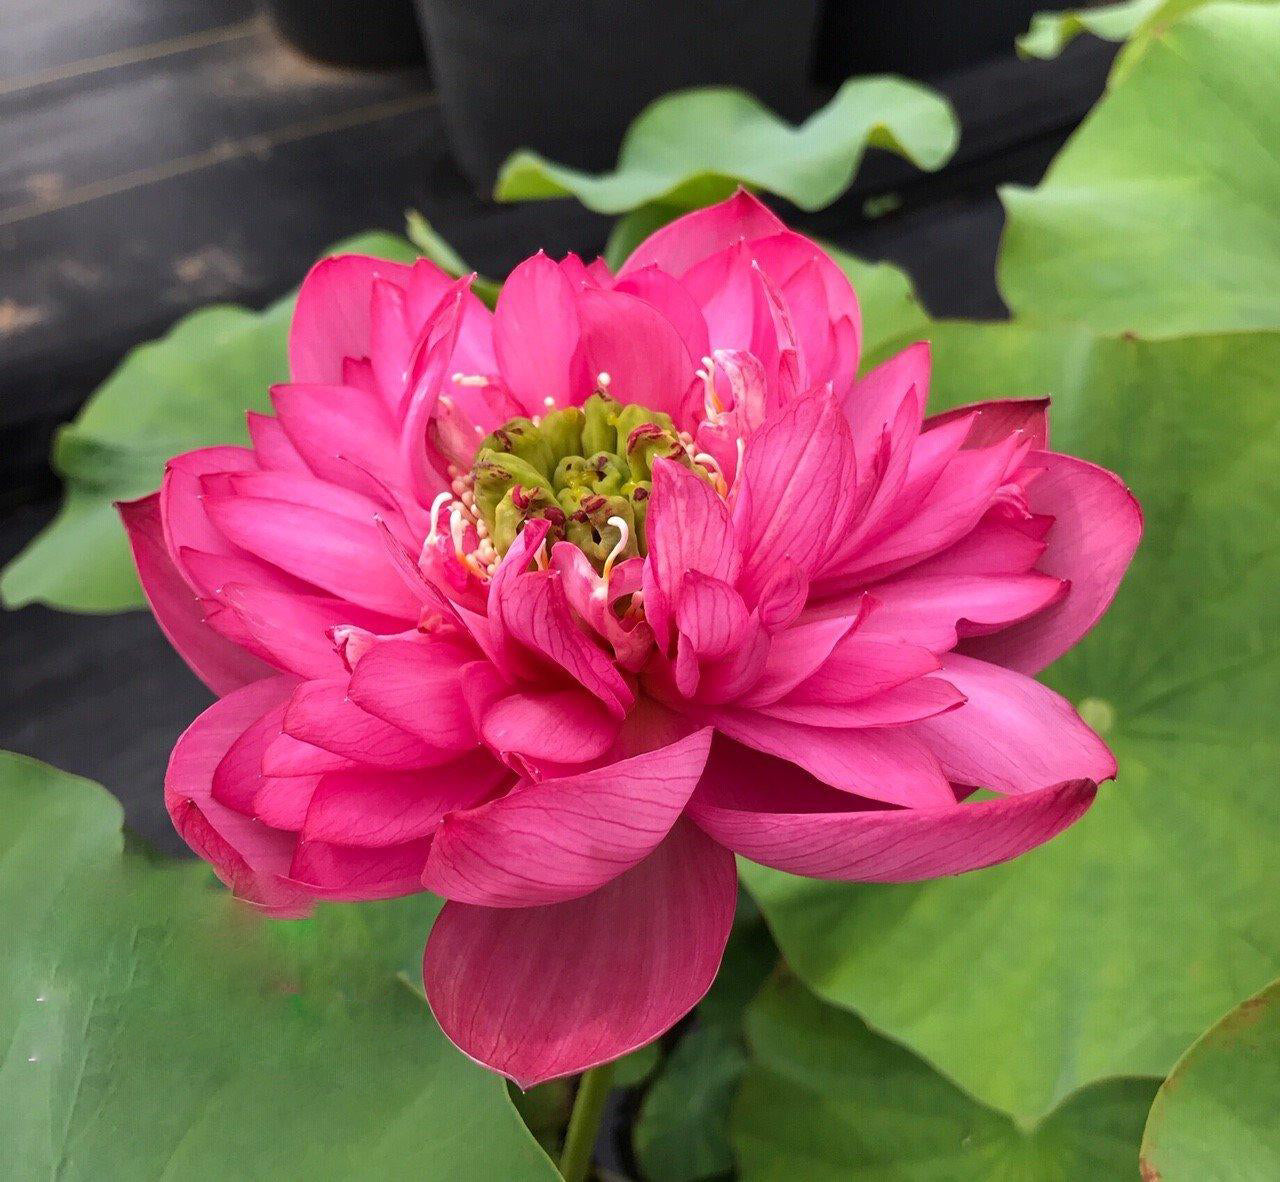 Jewel Flower - The Gem of the Garden Lotus (Bare Root) - Play It Koi